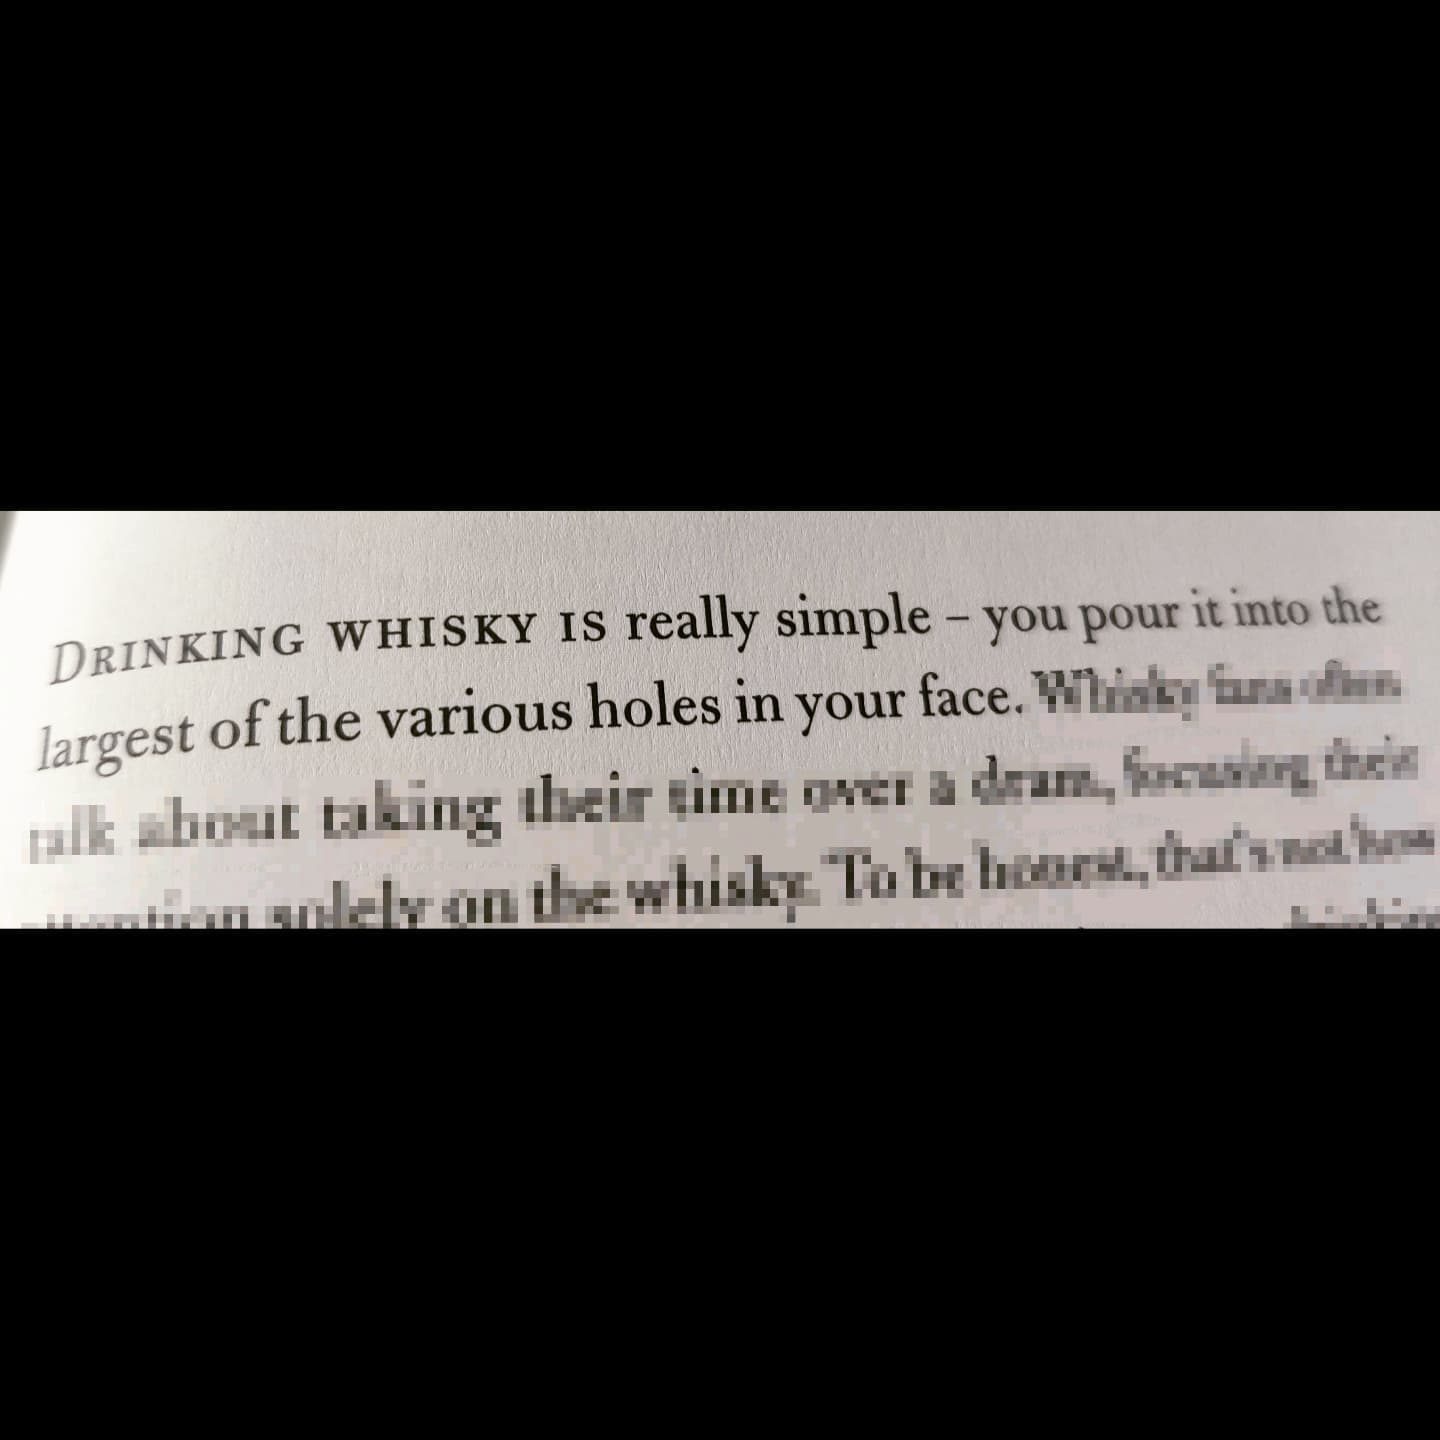 In years to come, if I ever write a whisky book, I'm going to be sure to include this excellent #whiskyquote by @meatrobot – and I fully expect other future authors to do the same. It's up there with WC Fields & his snakebite line. #philosophyofwhisky